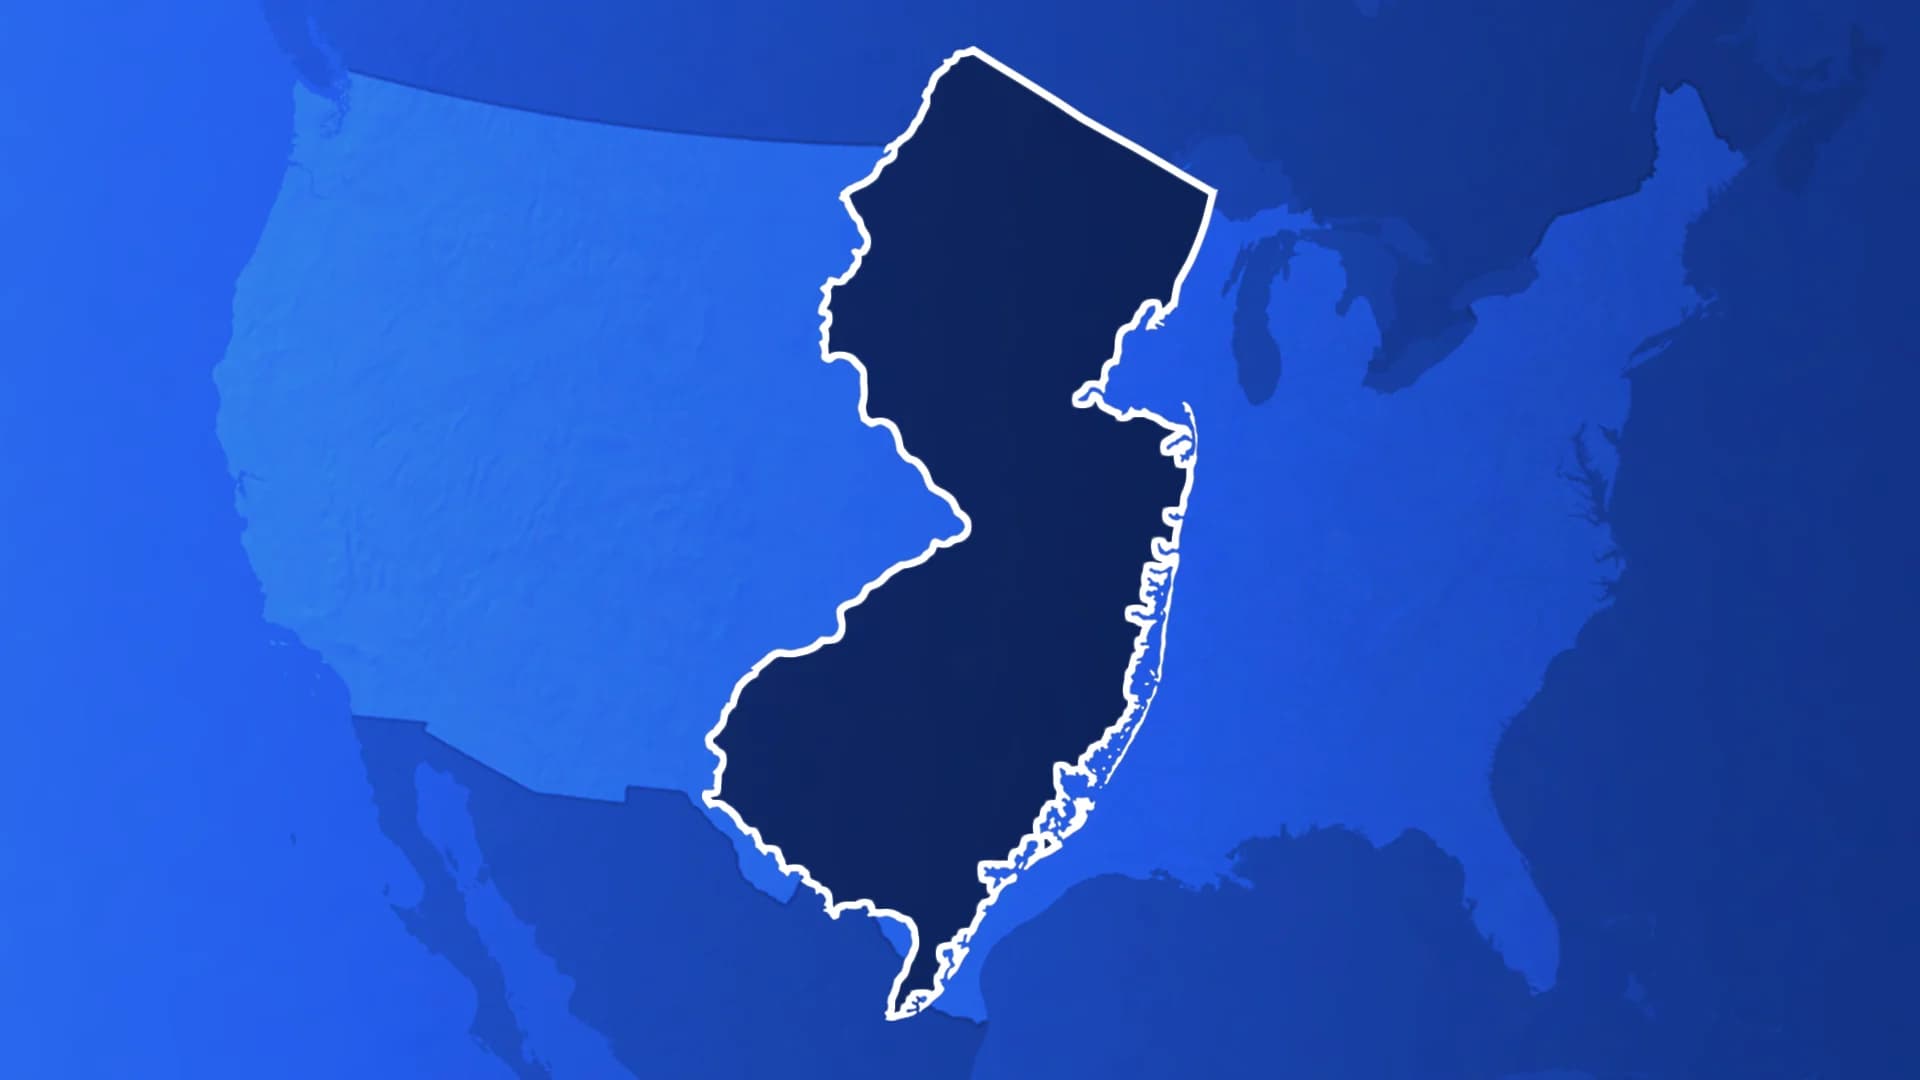 What do other Americans think of New Jersey? Find out what one study found